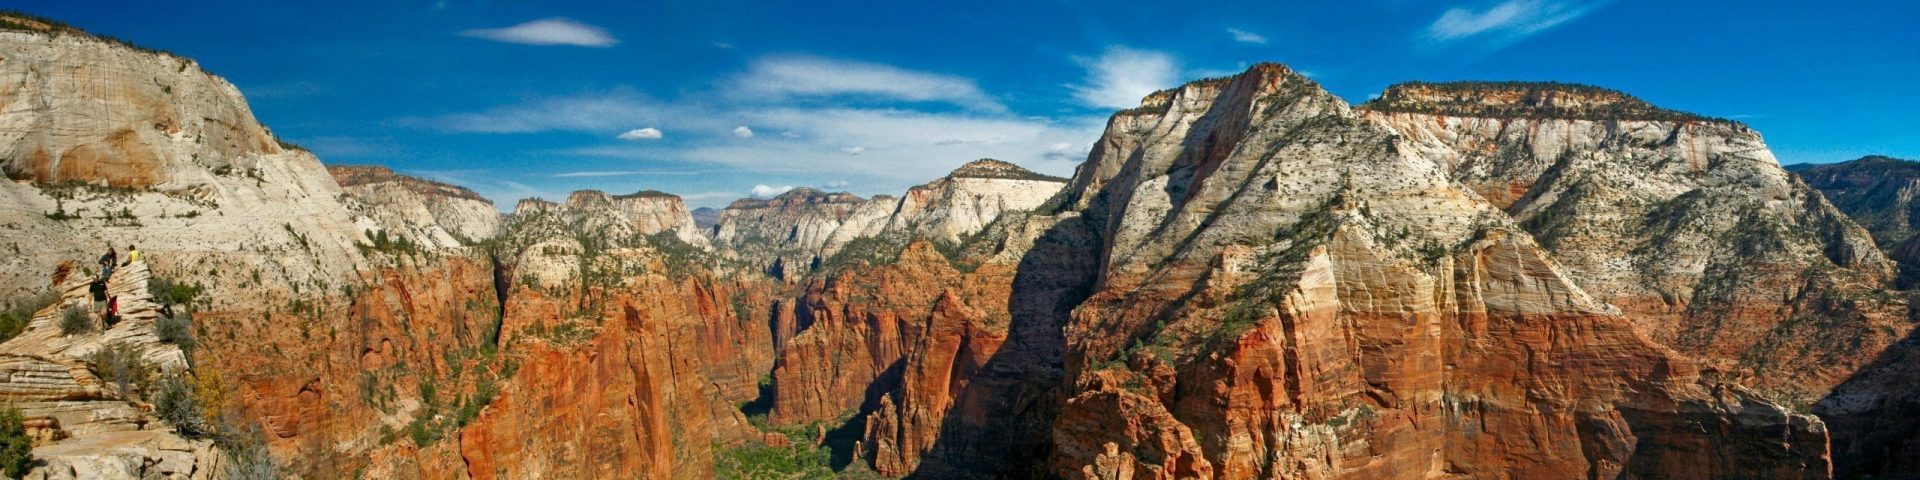 16 National Parks Self-Guided Driving Tours Bundle